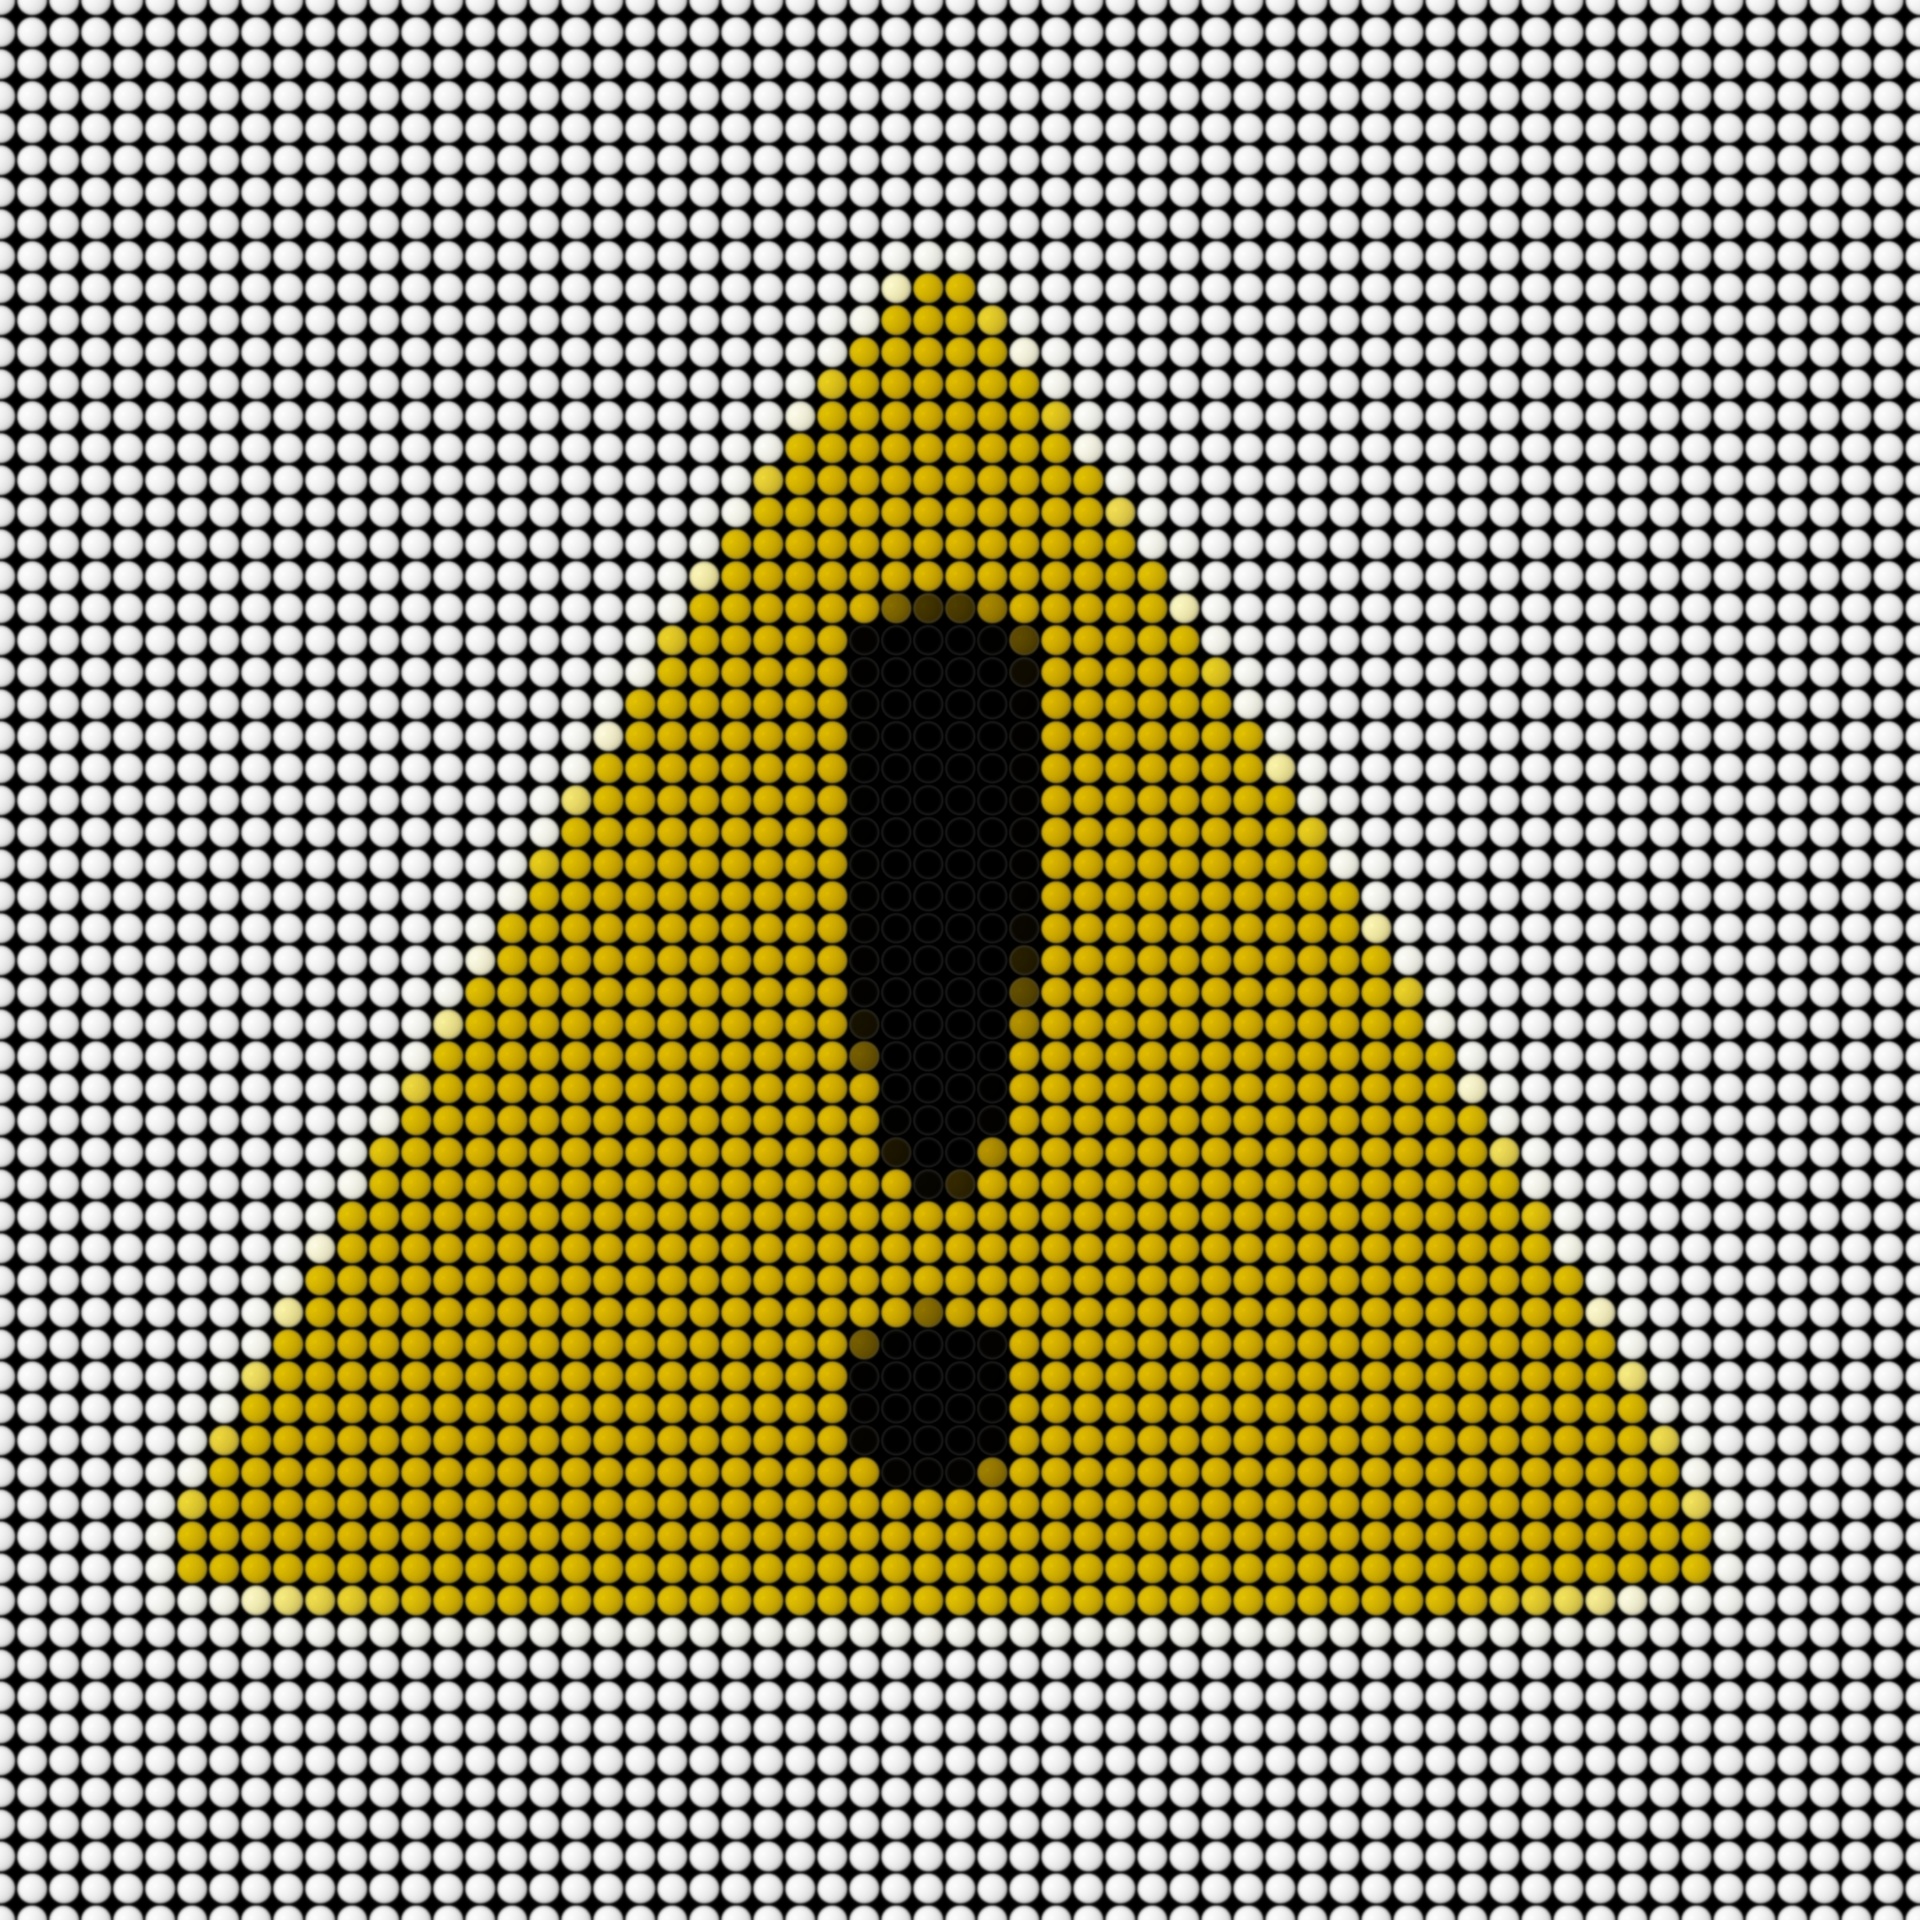 Attention Sign Icon